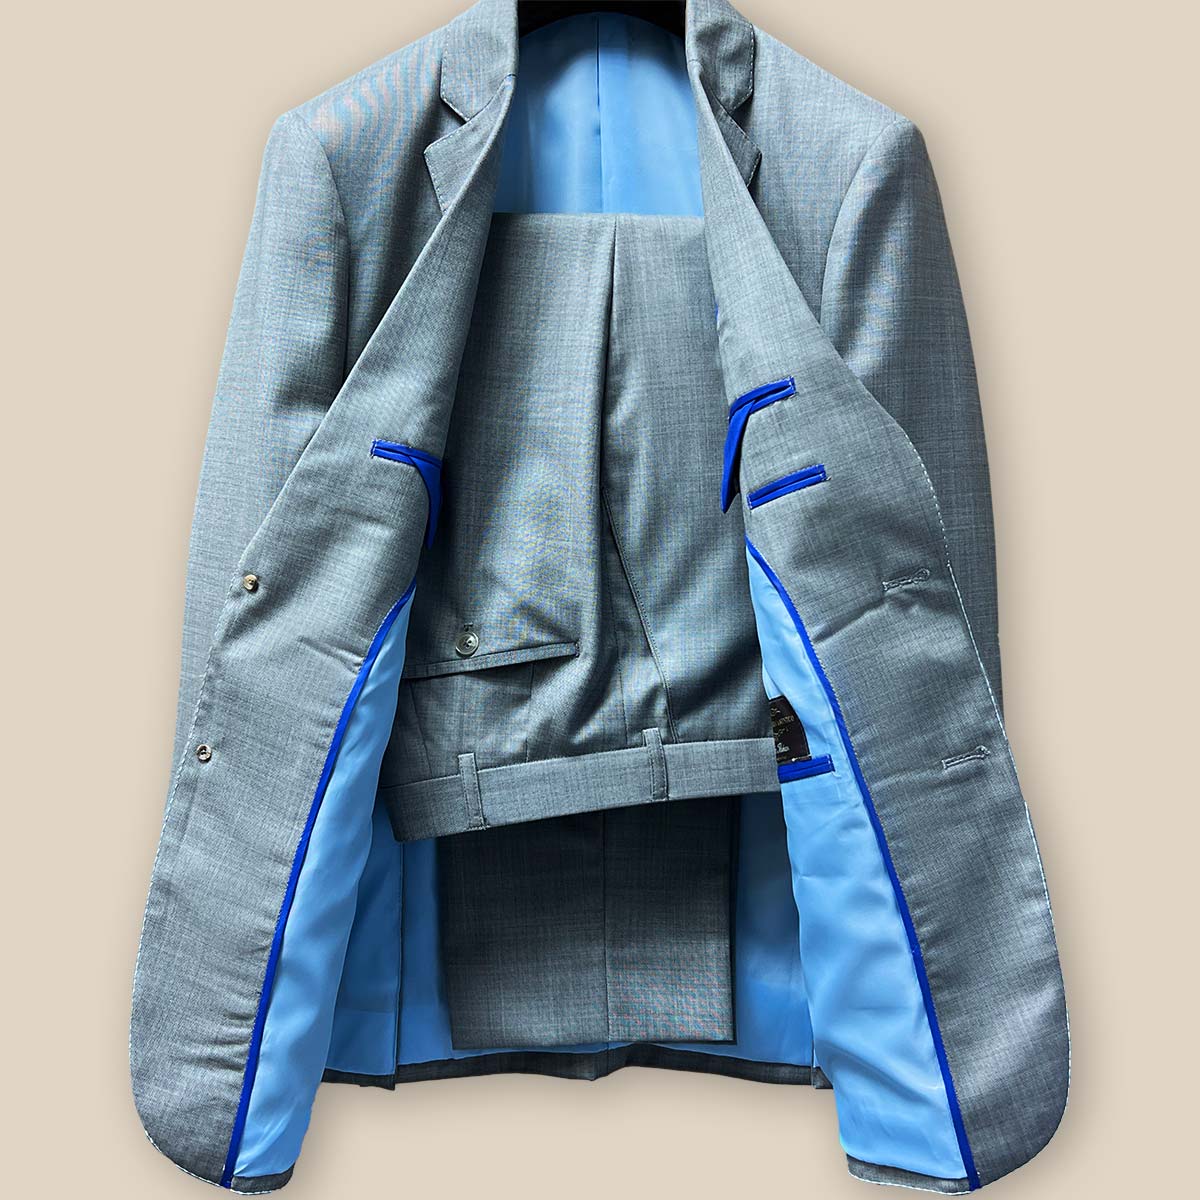 Full view of the two-piece light grey sharkskin suit with notch lapel, straight flap pockets, and grey marble horn buttons.